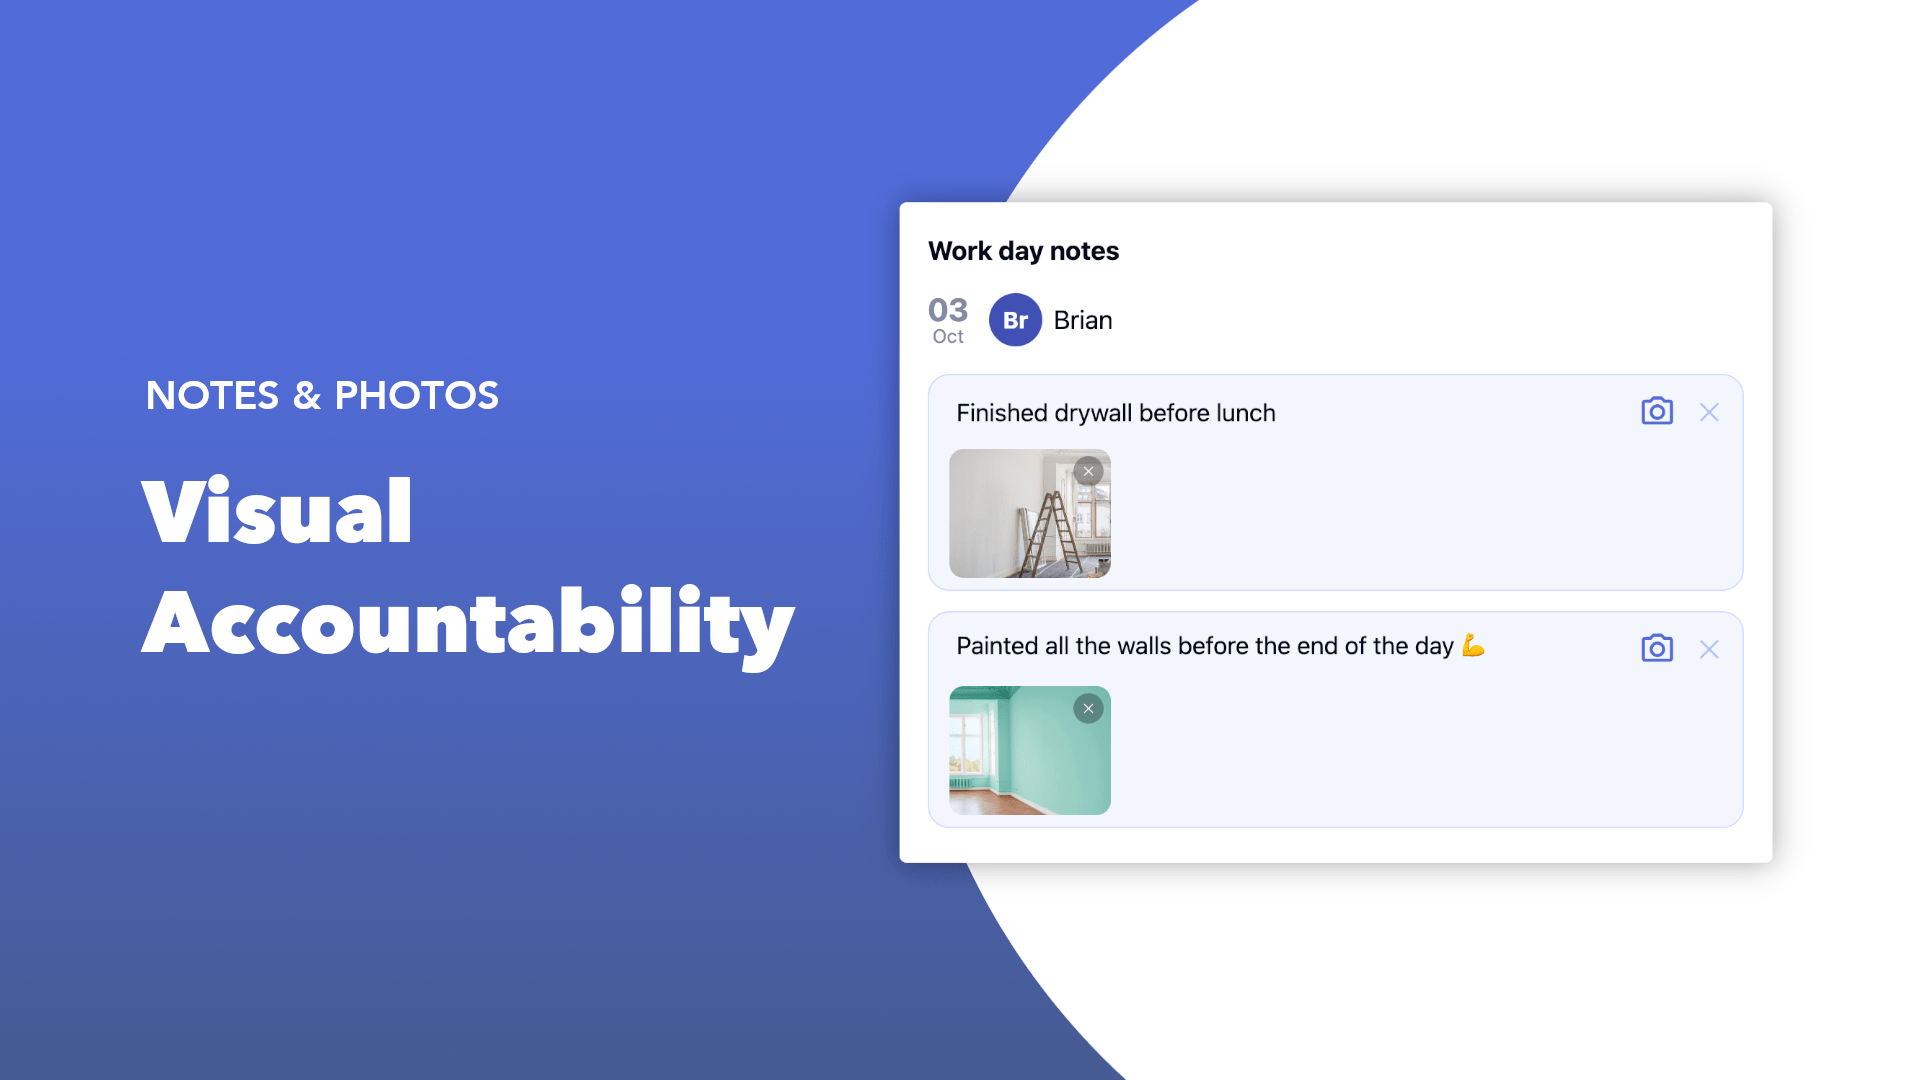 Enhance accountability with visual confirmations. Team members can attach photos to their task updates, providing clear, visual proof of completed assignments and progress.